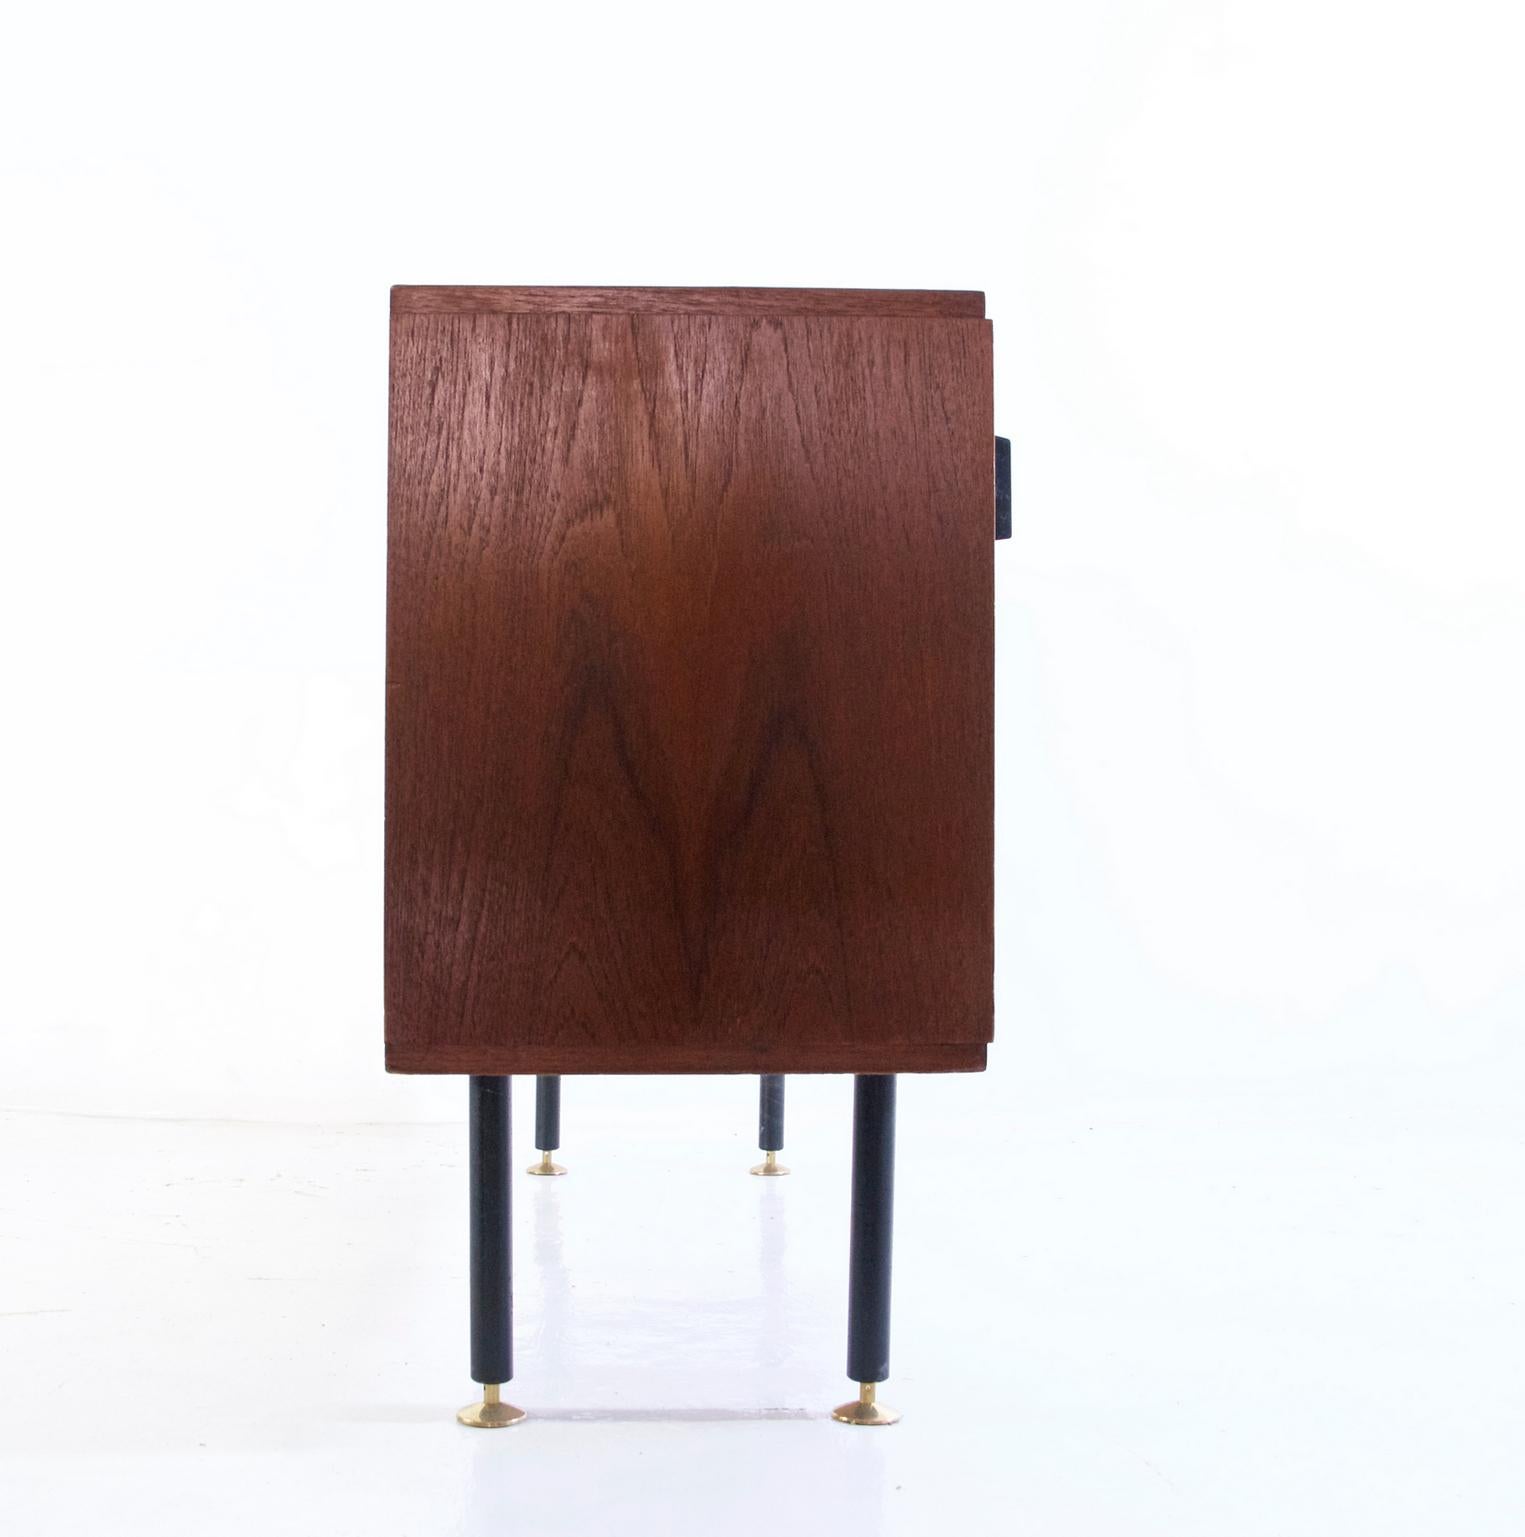 20th Century Midcentury Credenza by Herbert Hirsche for Christian Holzäpfel For Sale